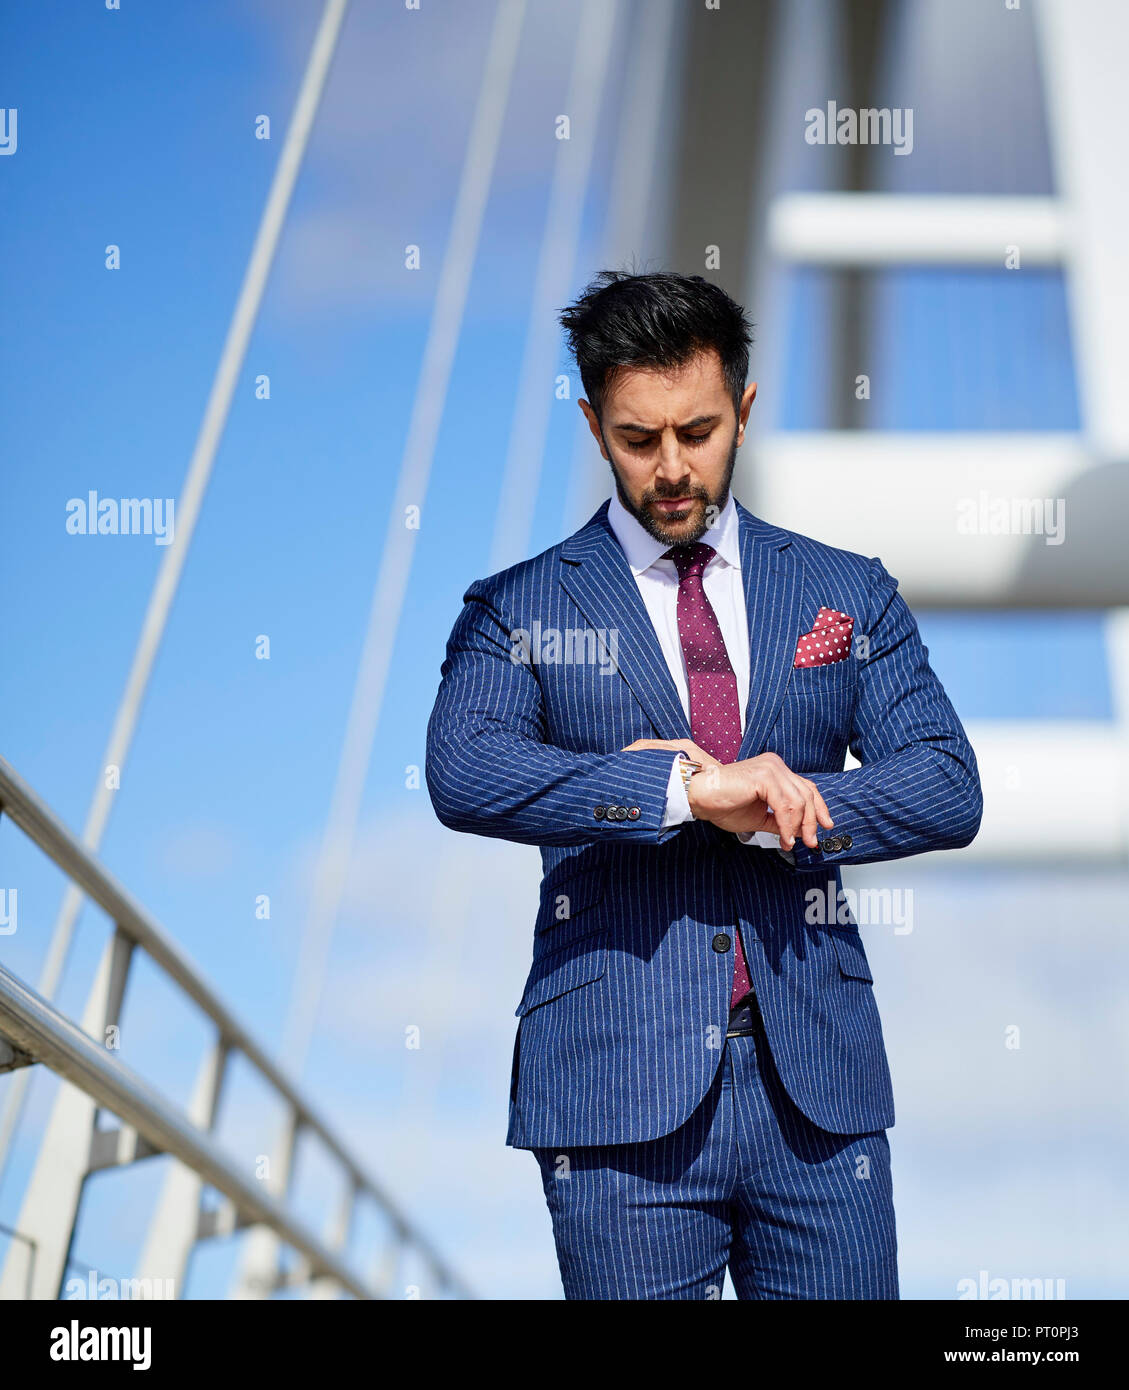 Stressed out businessman Stock Photo